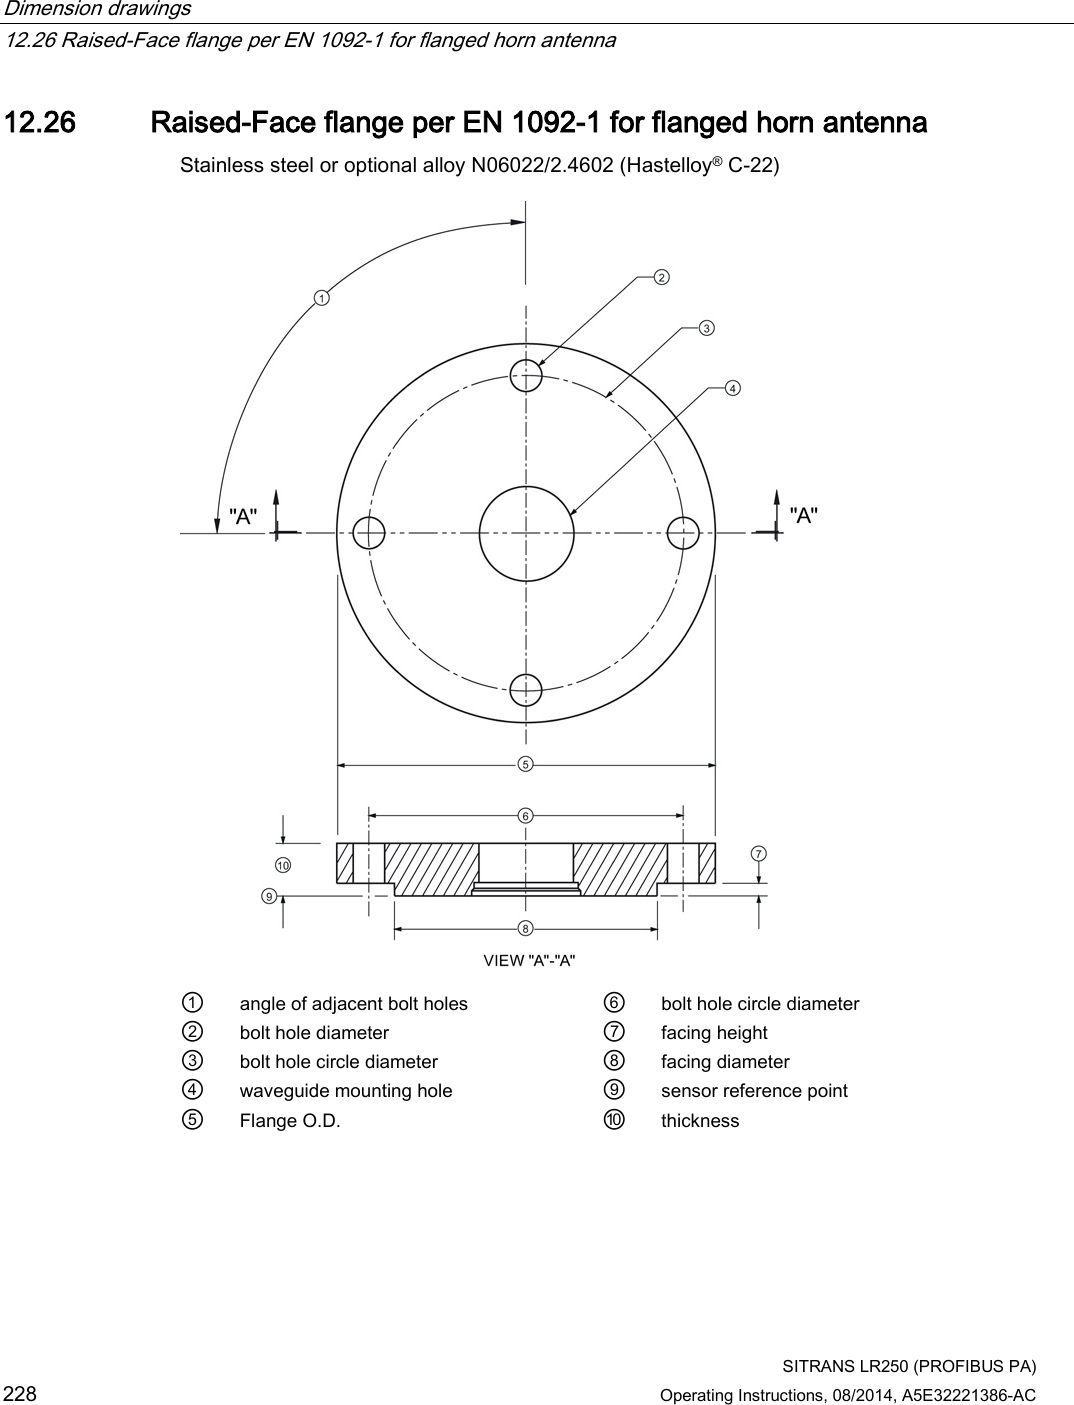 Dimension drawings   12.26 Raised-Face flange per EN 1092-1 for flanged horn antenna  SITRANS LR250 (PROFIBUS PA) 228 Operating Instructions, 08/2014, A5E32221386-AC 12.26 Raised-Face flange per EN 1092-1 for flanged horn antenna Stainless steel or optional alloy N06022/2.4602 (Hastelloy® C-22)  ① angle of adjacent bolt holes ⑥ bolt hole circle diameter ② bolt hole diameter ⑦ facing height ③ bolt hole circle diameter ⑧ facing diameter ④ waveguide mounting hole ⑨ sensor reference point ⑤ Flange O.D. ⑩ thickness 